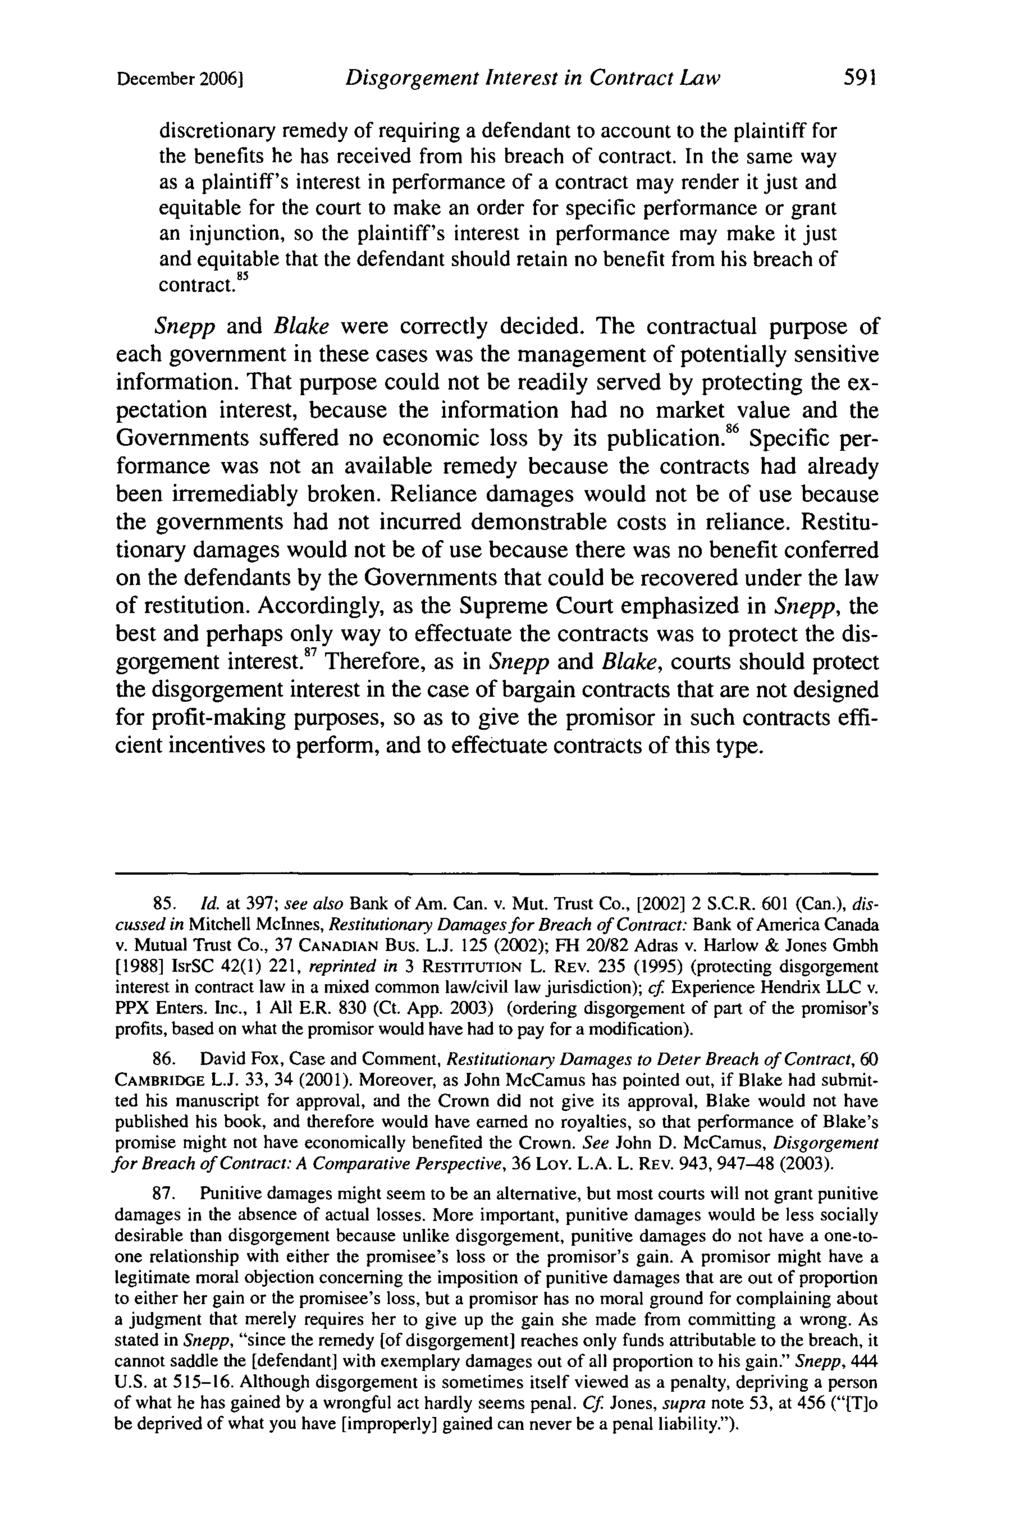 December 2006] Disgorgement Interest in Contract Law discretionary remedy of requiring a defendant to account to the plaintiff for the benefits he has received from his breach of contract.